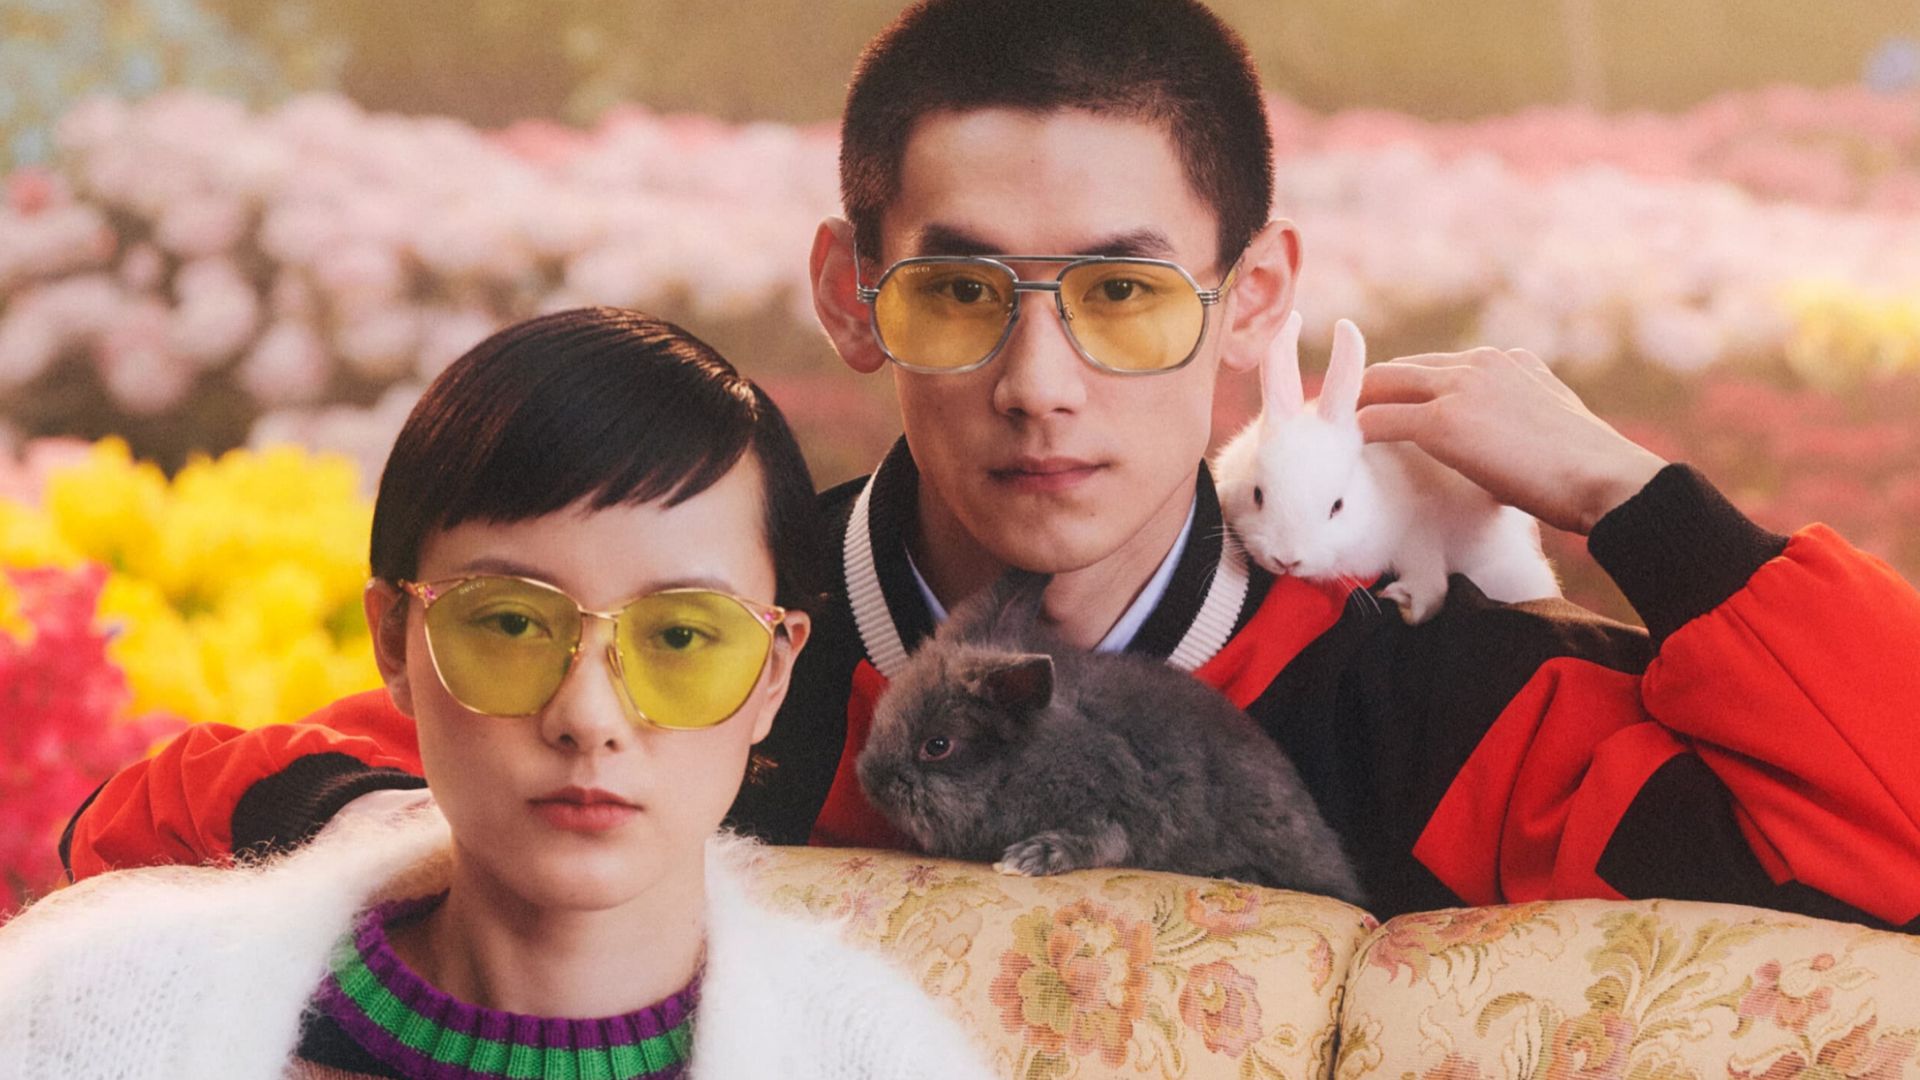 Have A Chic Chinese New Year 2020 With Gucci, Louis Vuitton, Fendi & More